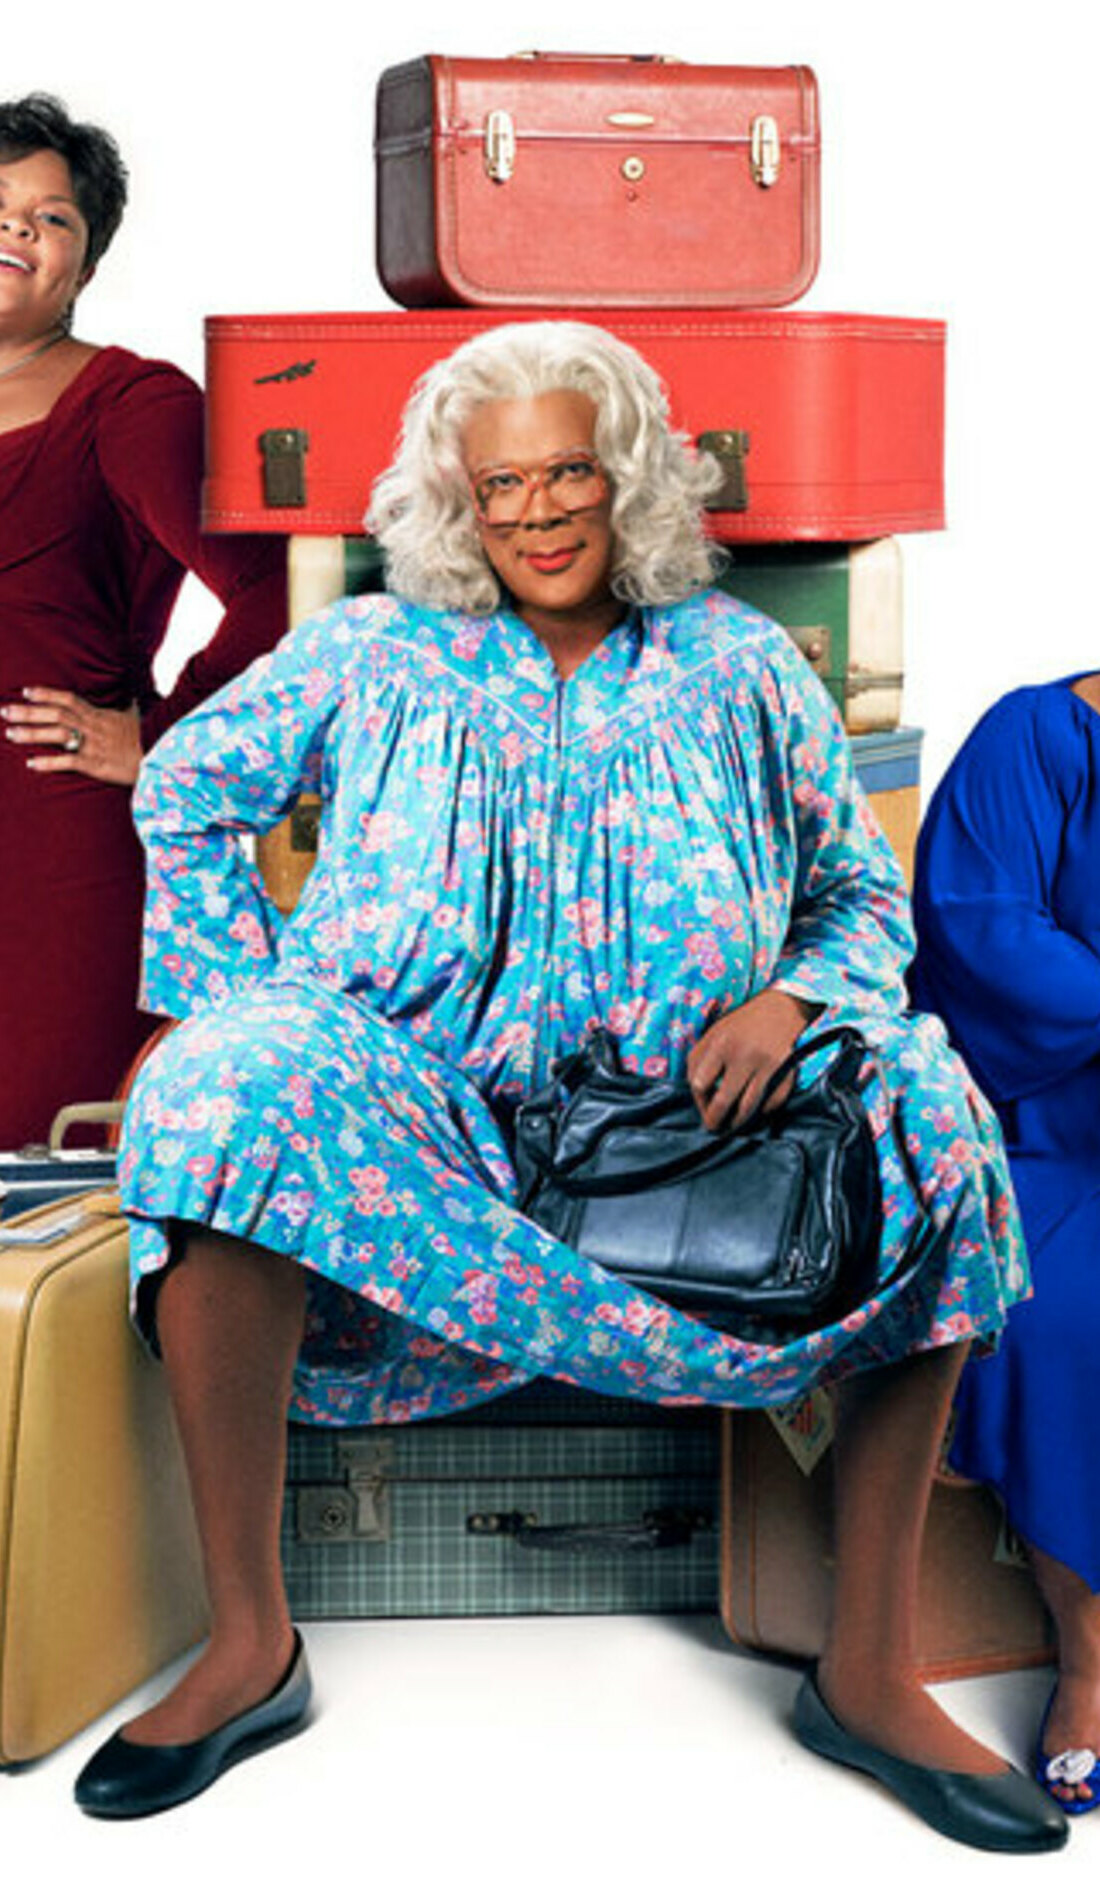 A Tyler Perry's Madea's Farewell live event